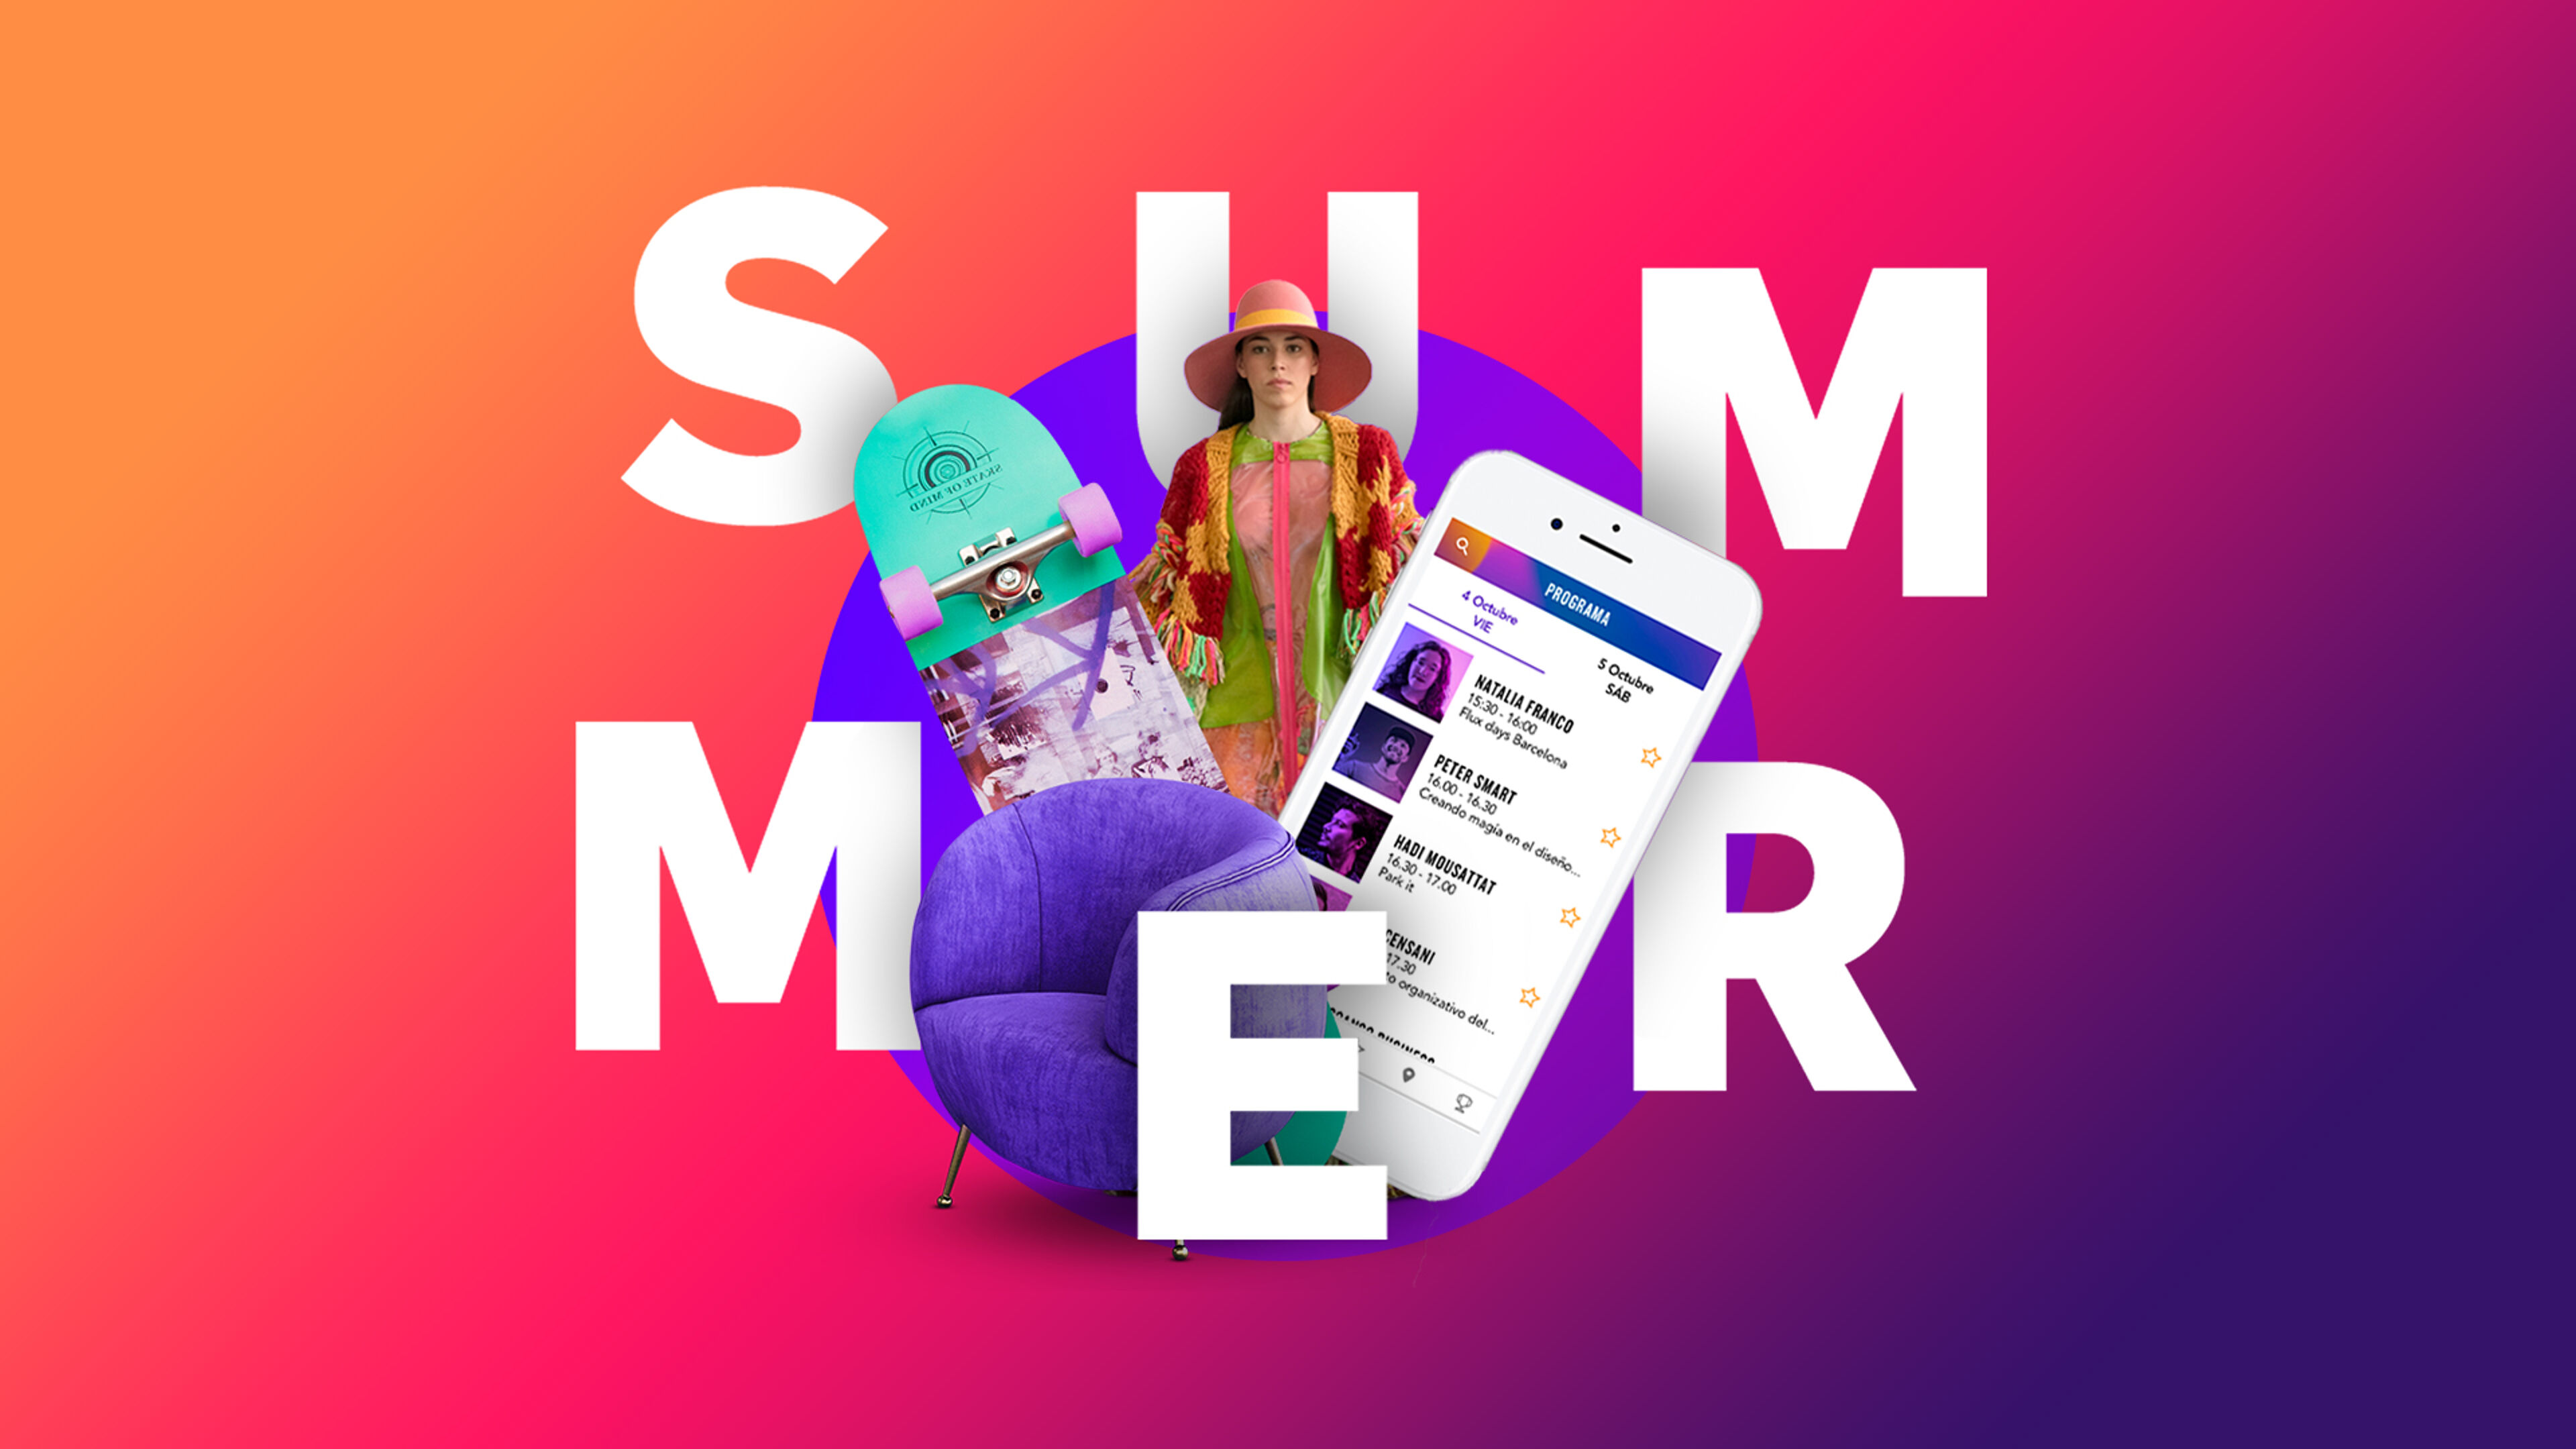 A vibrant ad featuring the word SUMMER, a woman in a sun hat, and a smartphone showing an app.